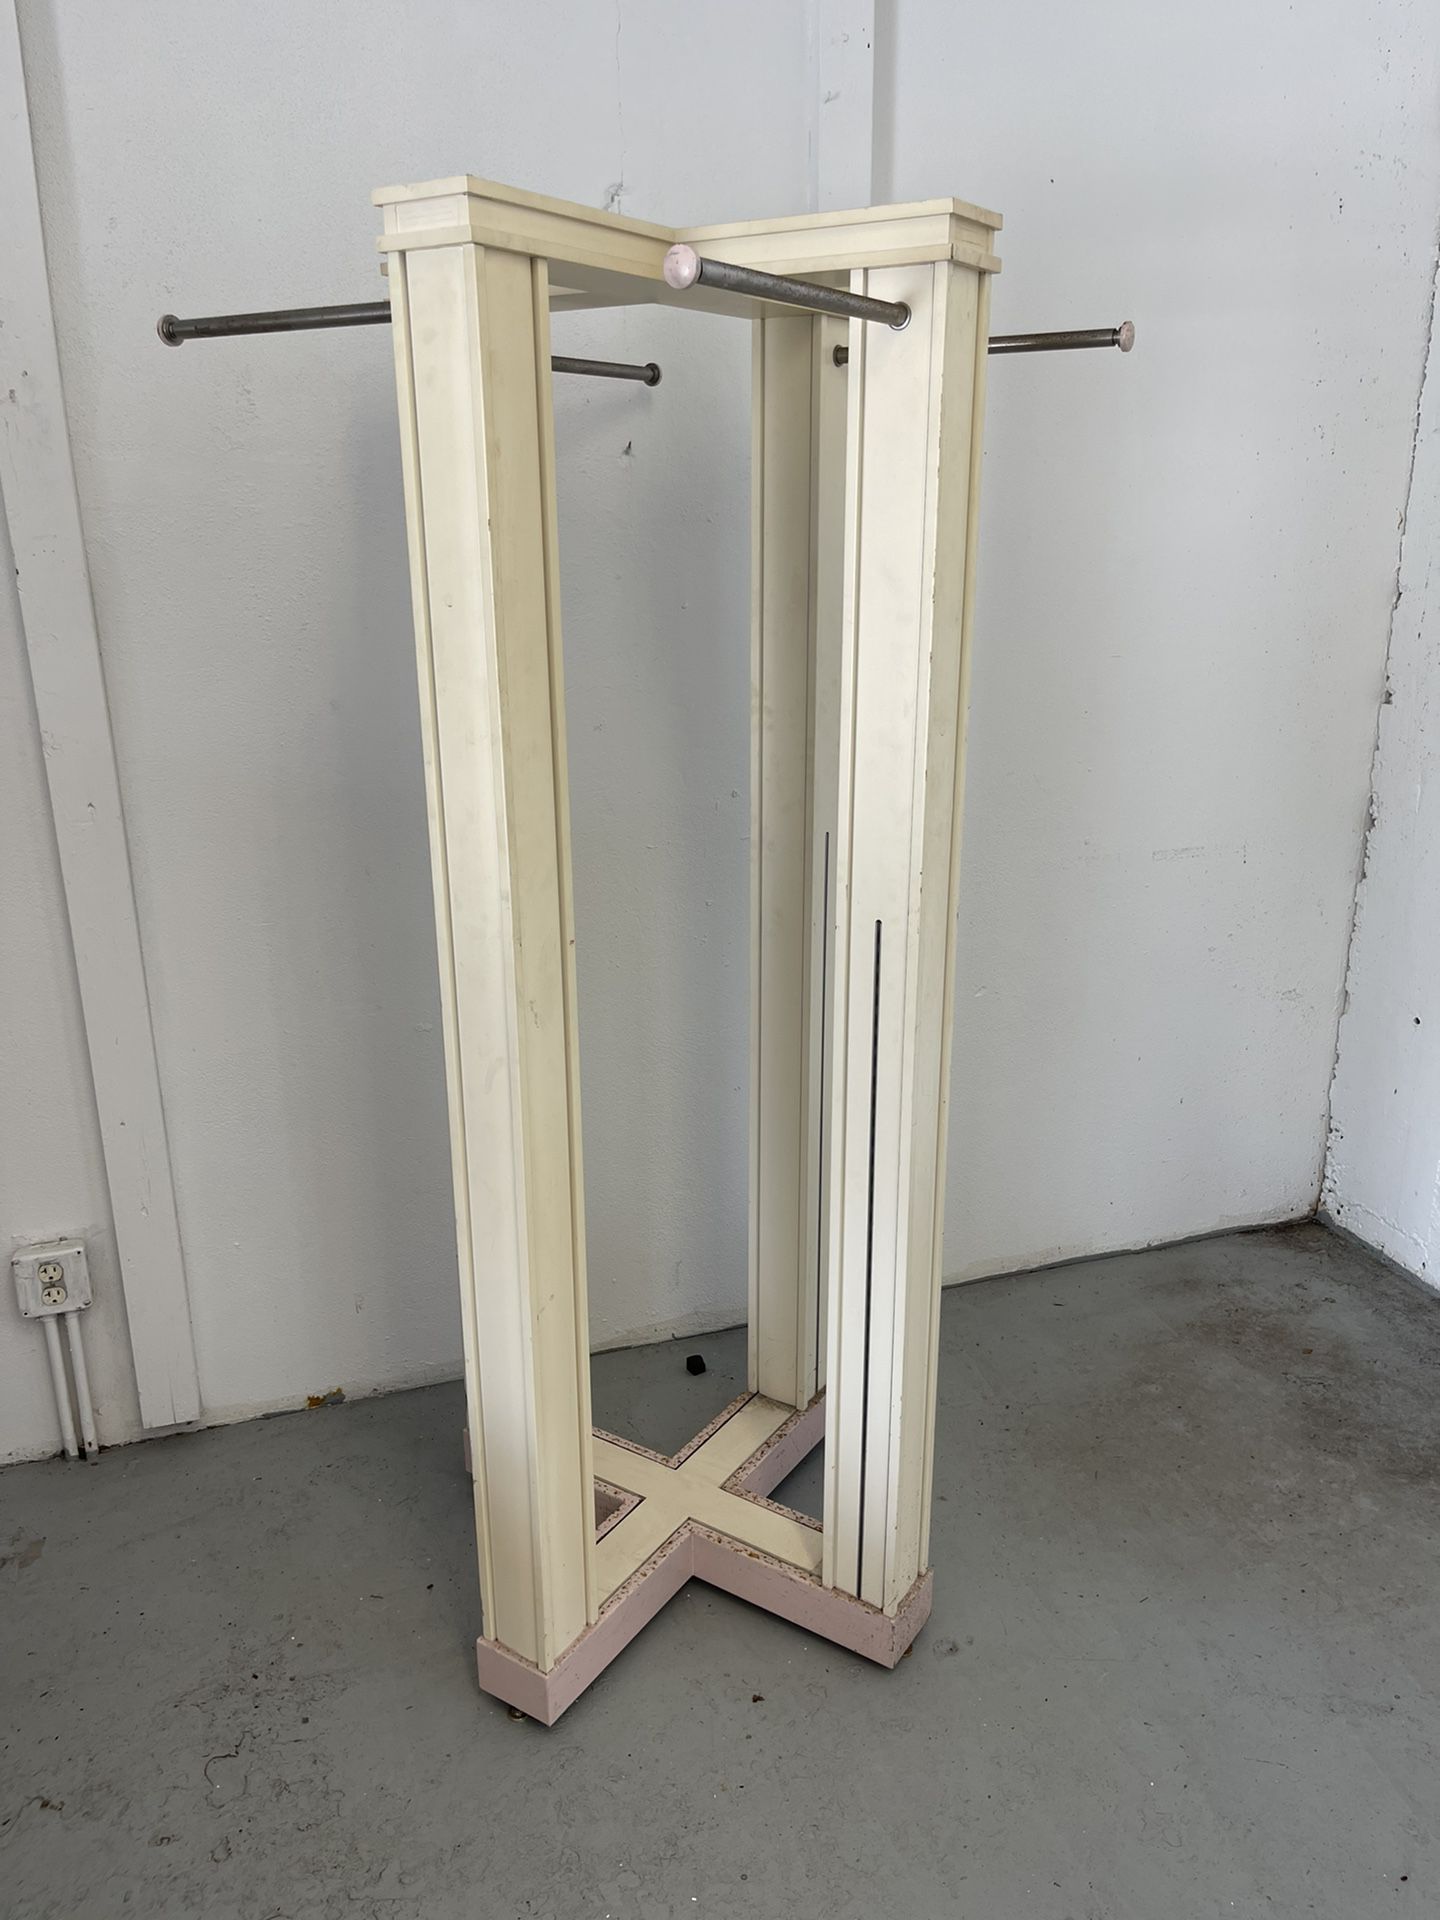 Off White Wood 4 Way Retail Store Free Standing Clothes Rack With Slat Inserts  Can Add Shelves